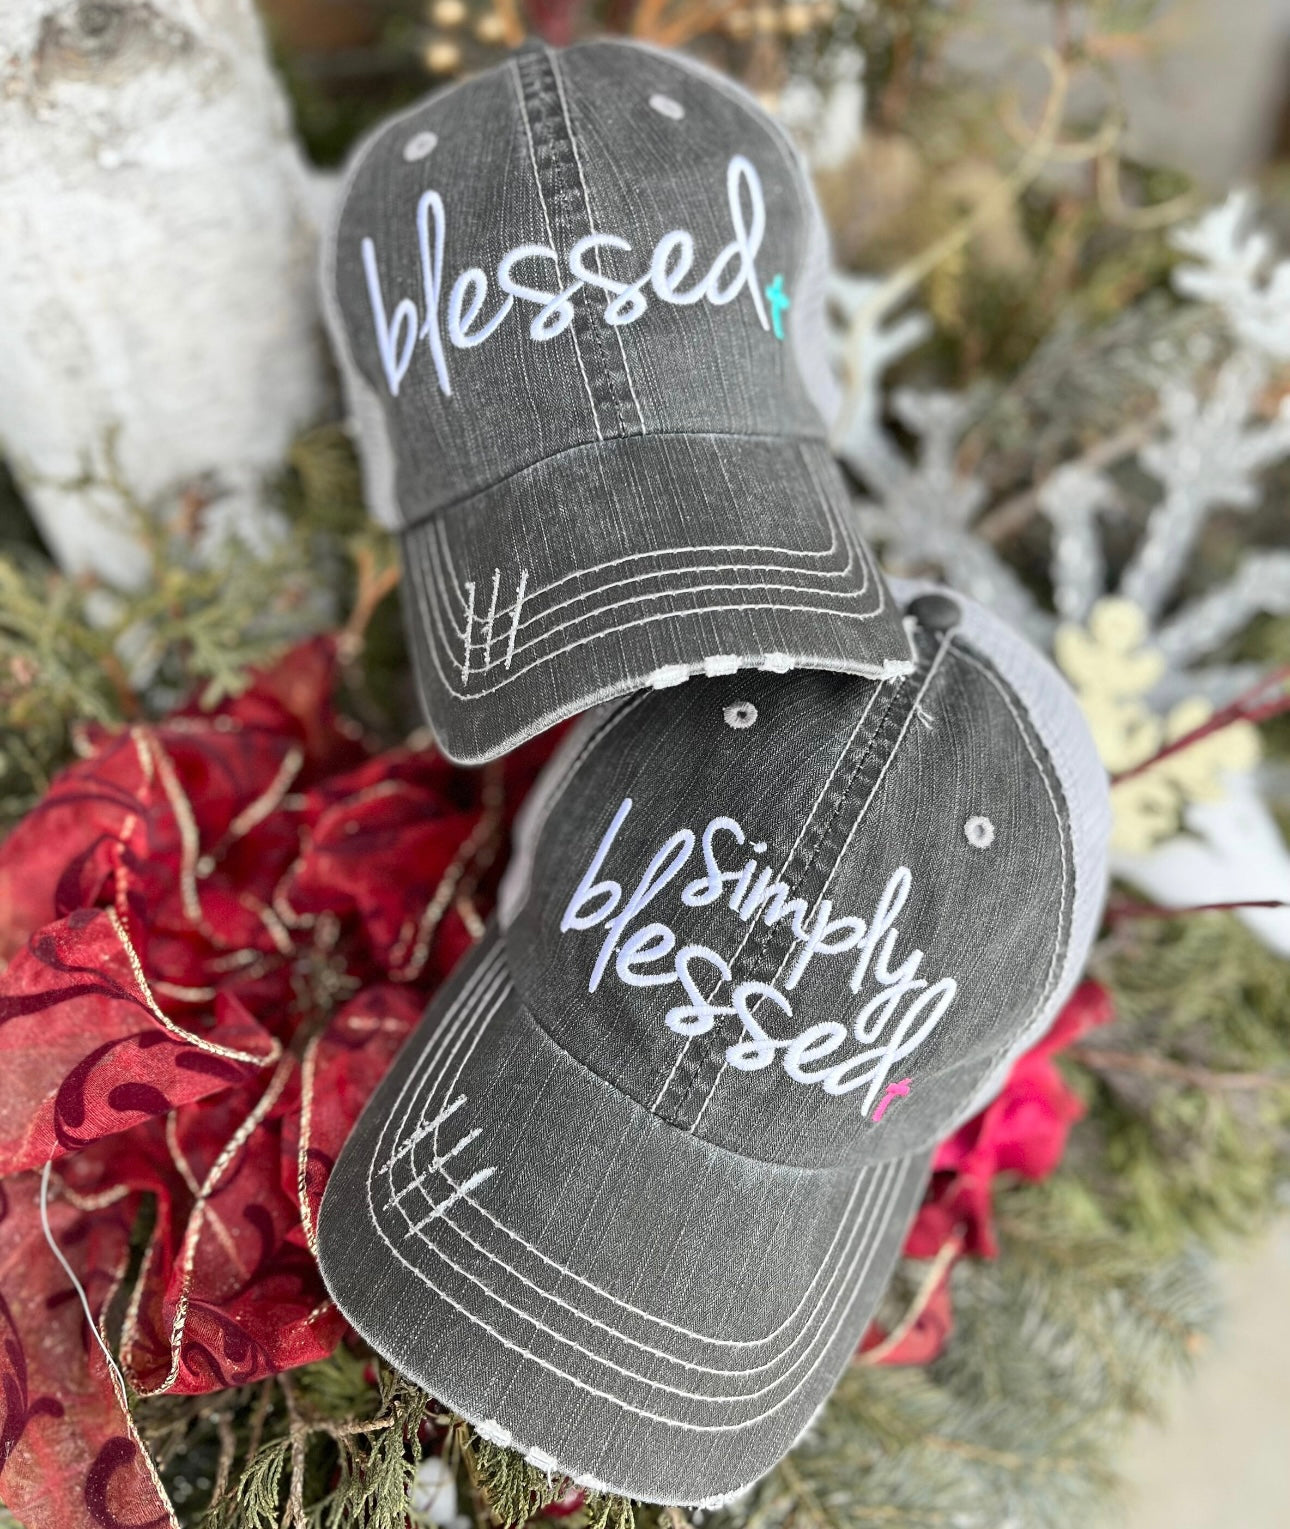 Blessed Hats Simply Blessed Pink or teal cross Gray distressed trucker cap with adjustable velkro Blessed hot mess